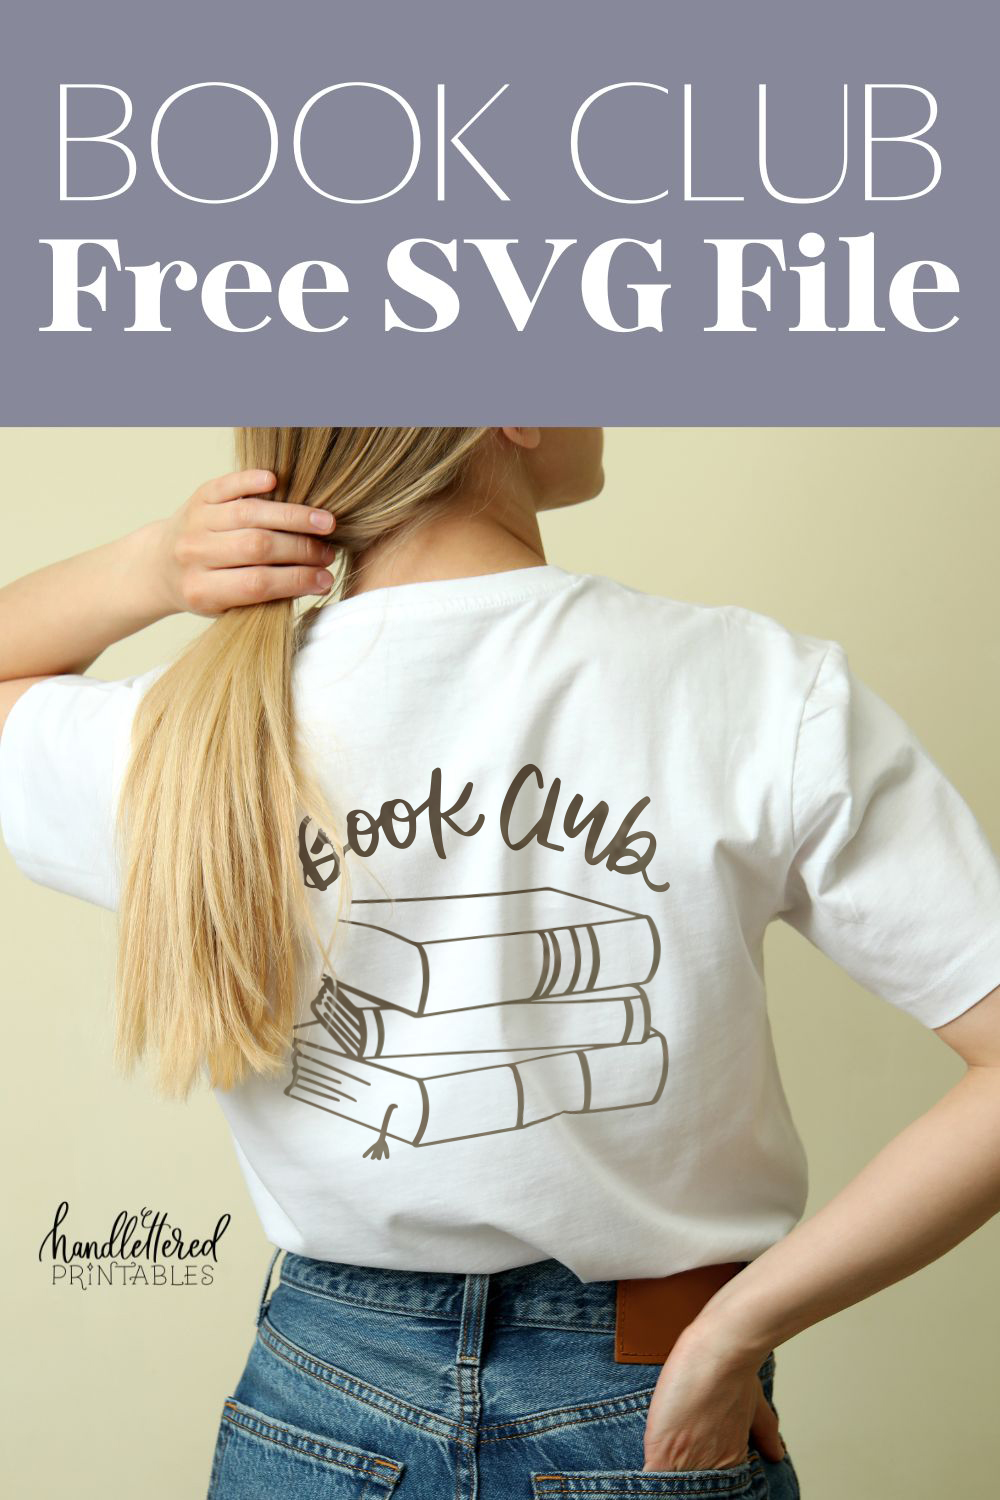 Book Club with stack of books on the back of a t-shirt. text reads 'book club free SVG file'